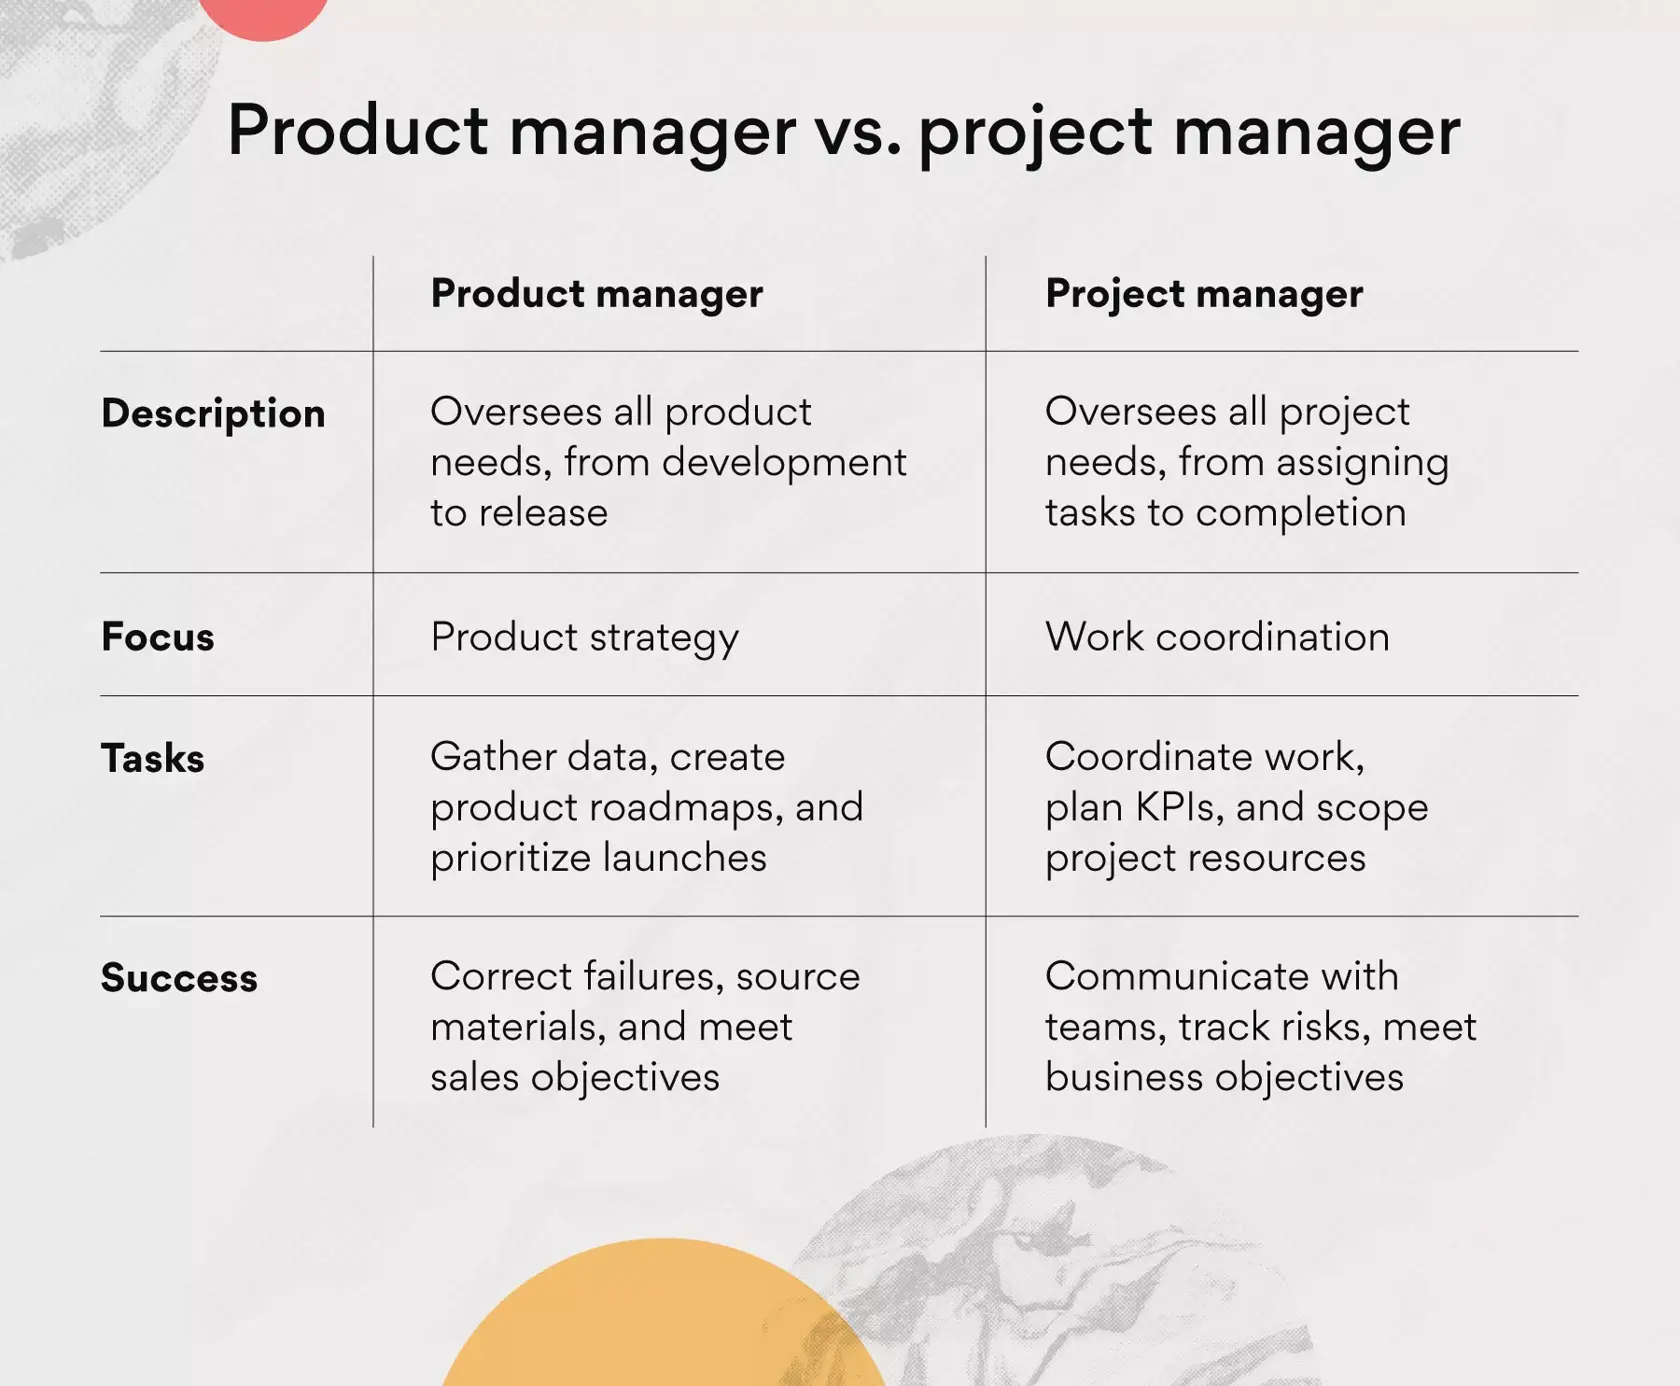 Product manager e project manager a confronto